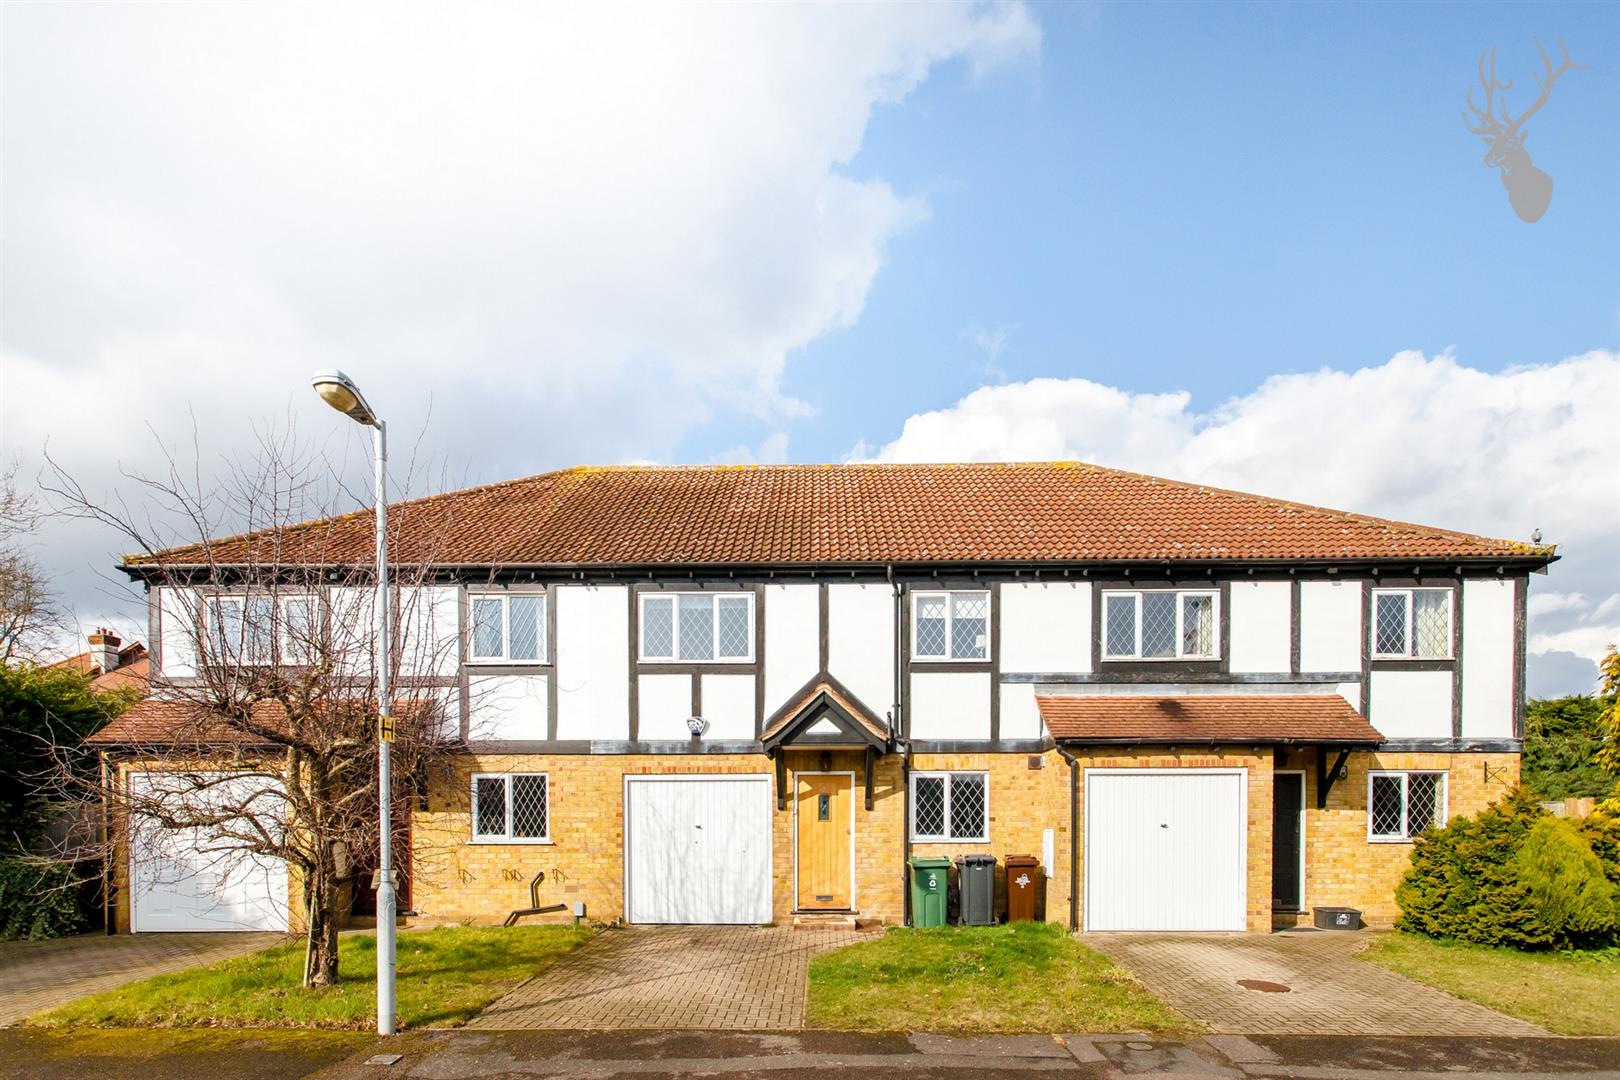 Similar Property: House - Detached in Chingford